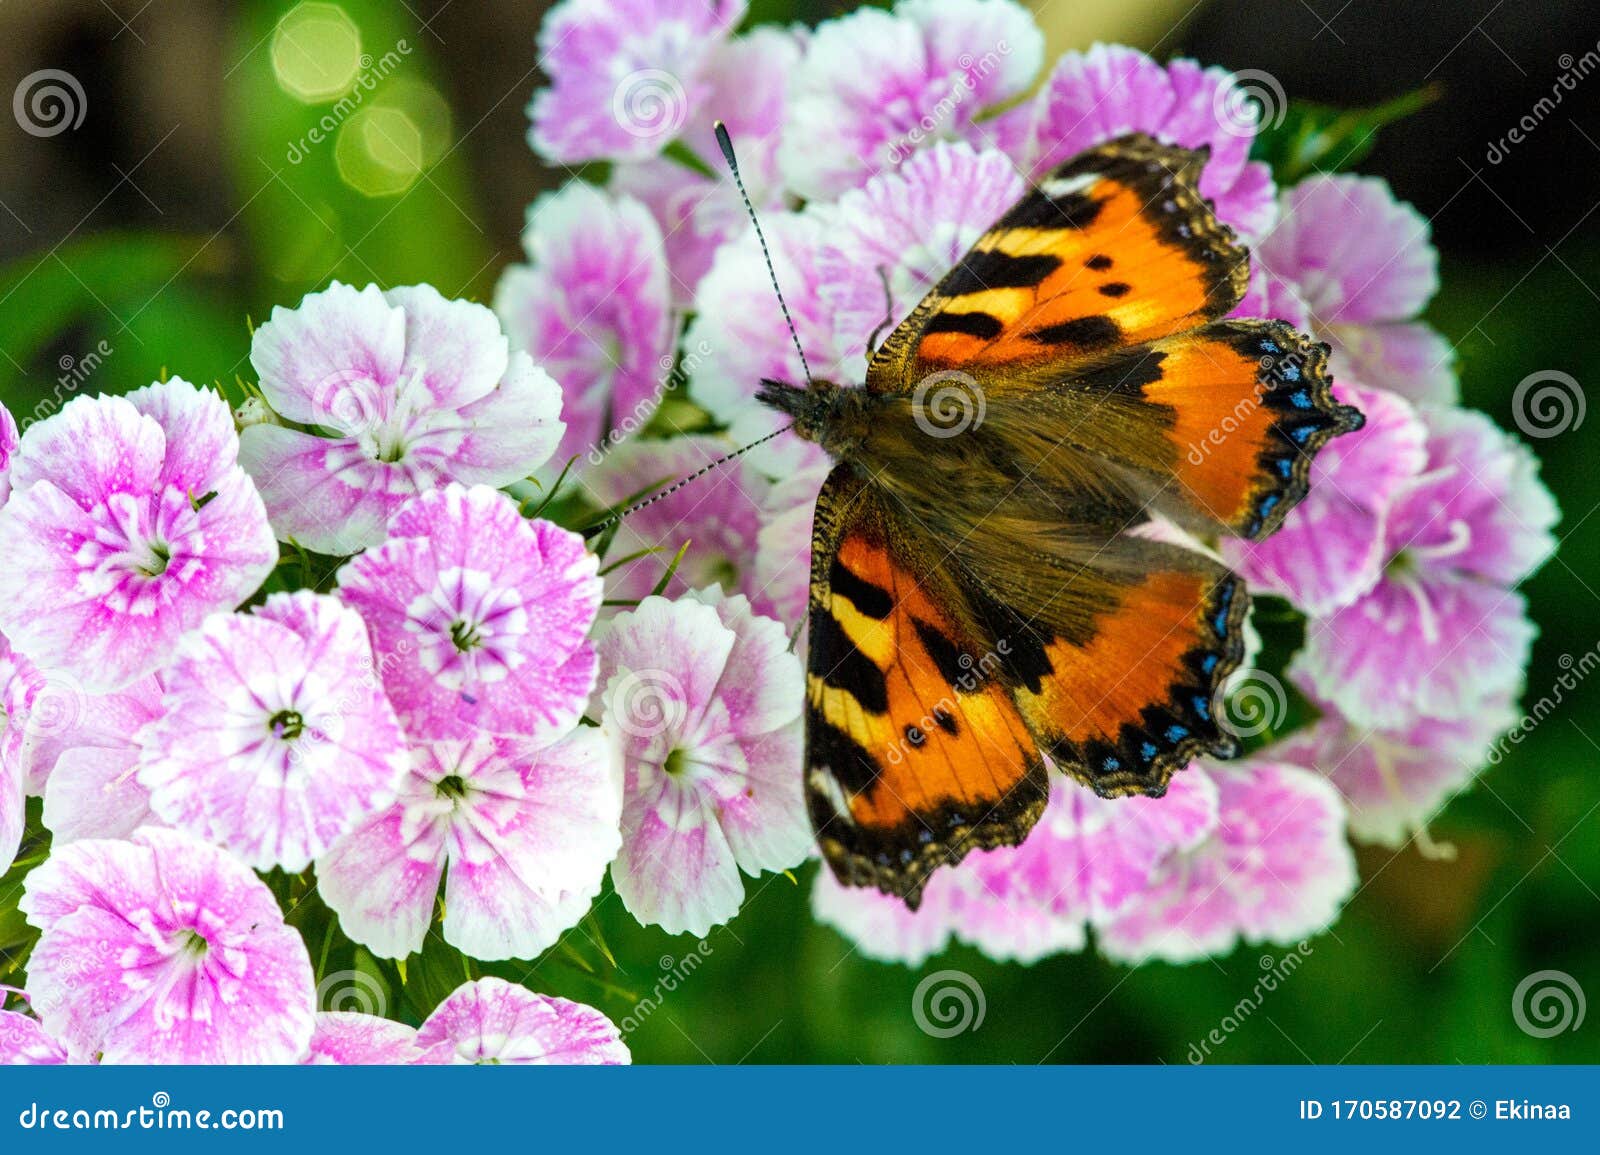 nymphalis xanthomelas, a rare tortoiseshell, is a kind of nymphalide butterfly found in eastern europe and asia. this butterfly is